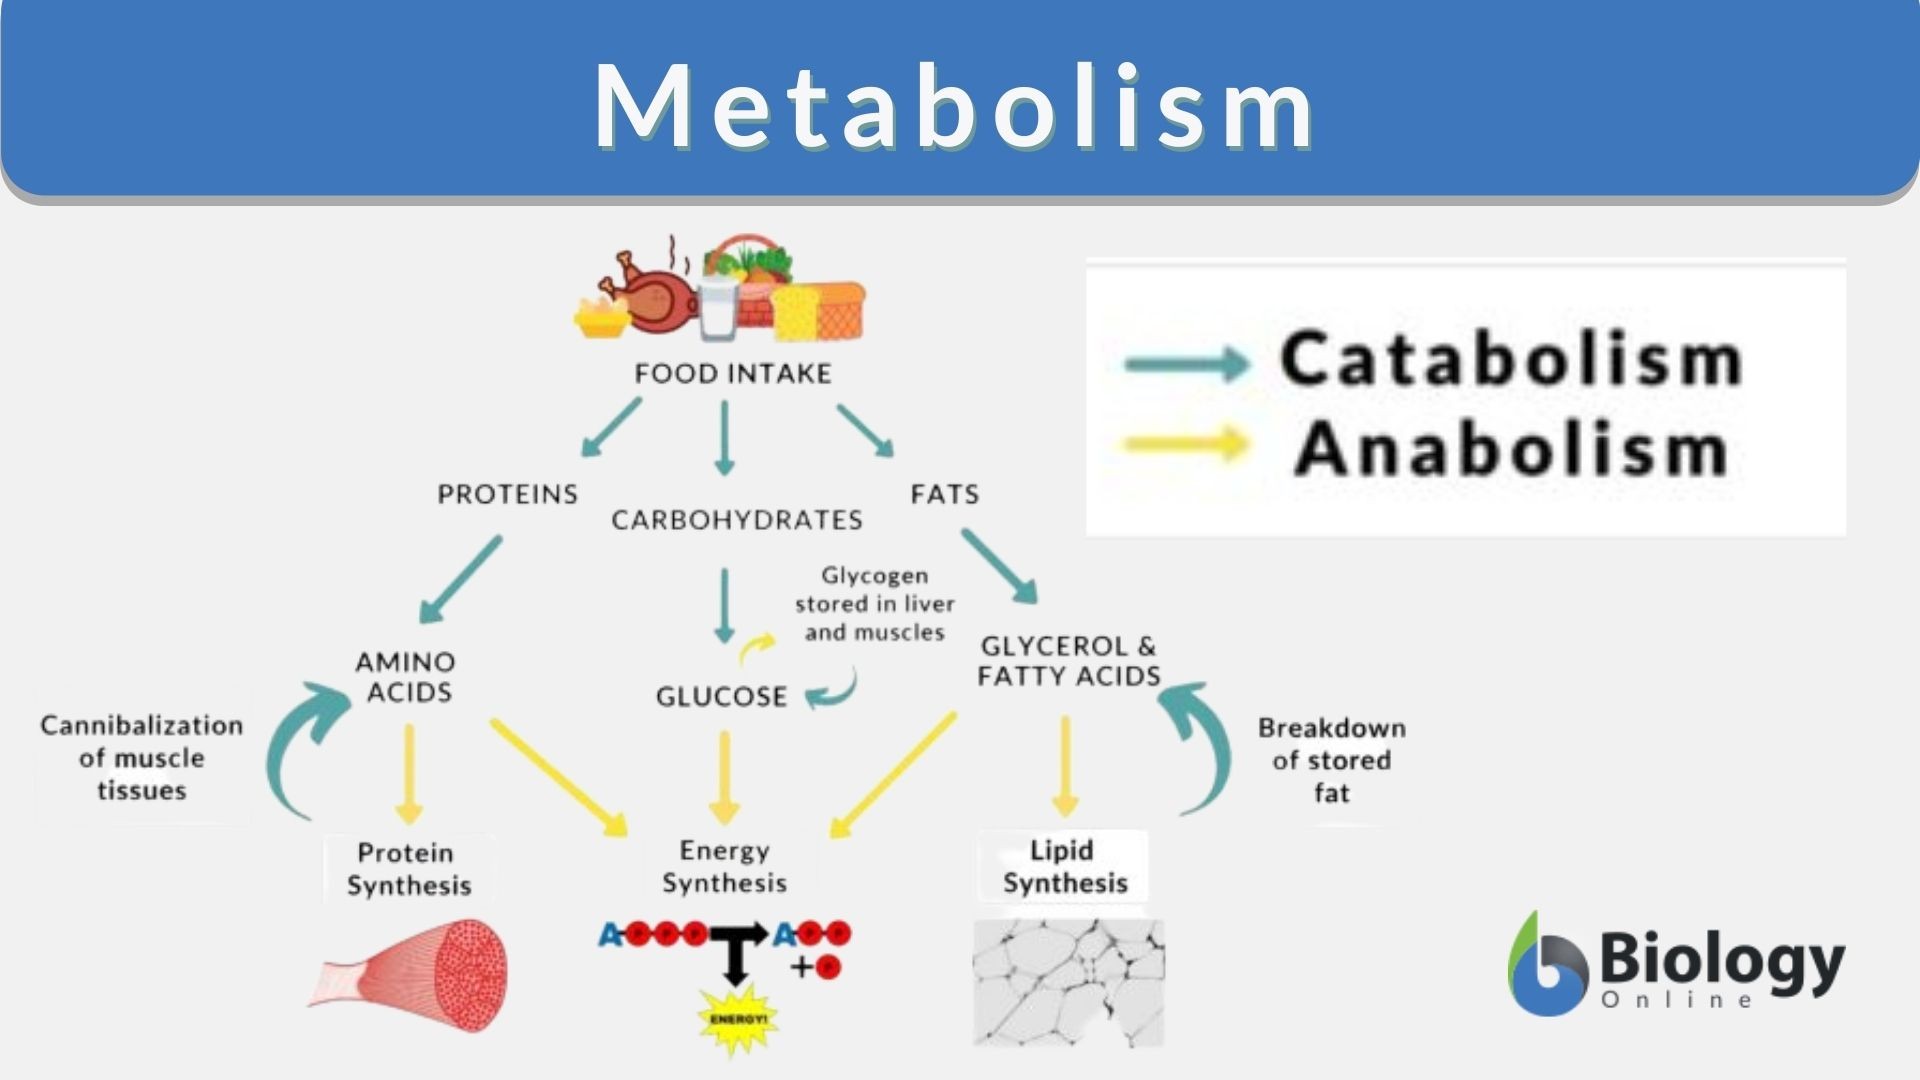 Metabolism - Definition and Examples - Biology Online Dictionary